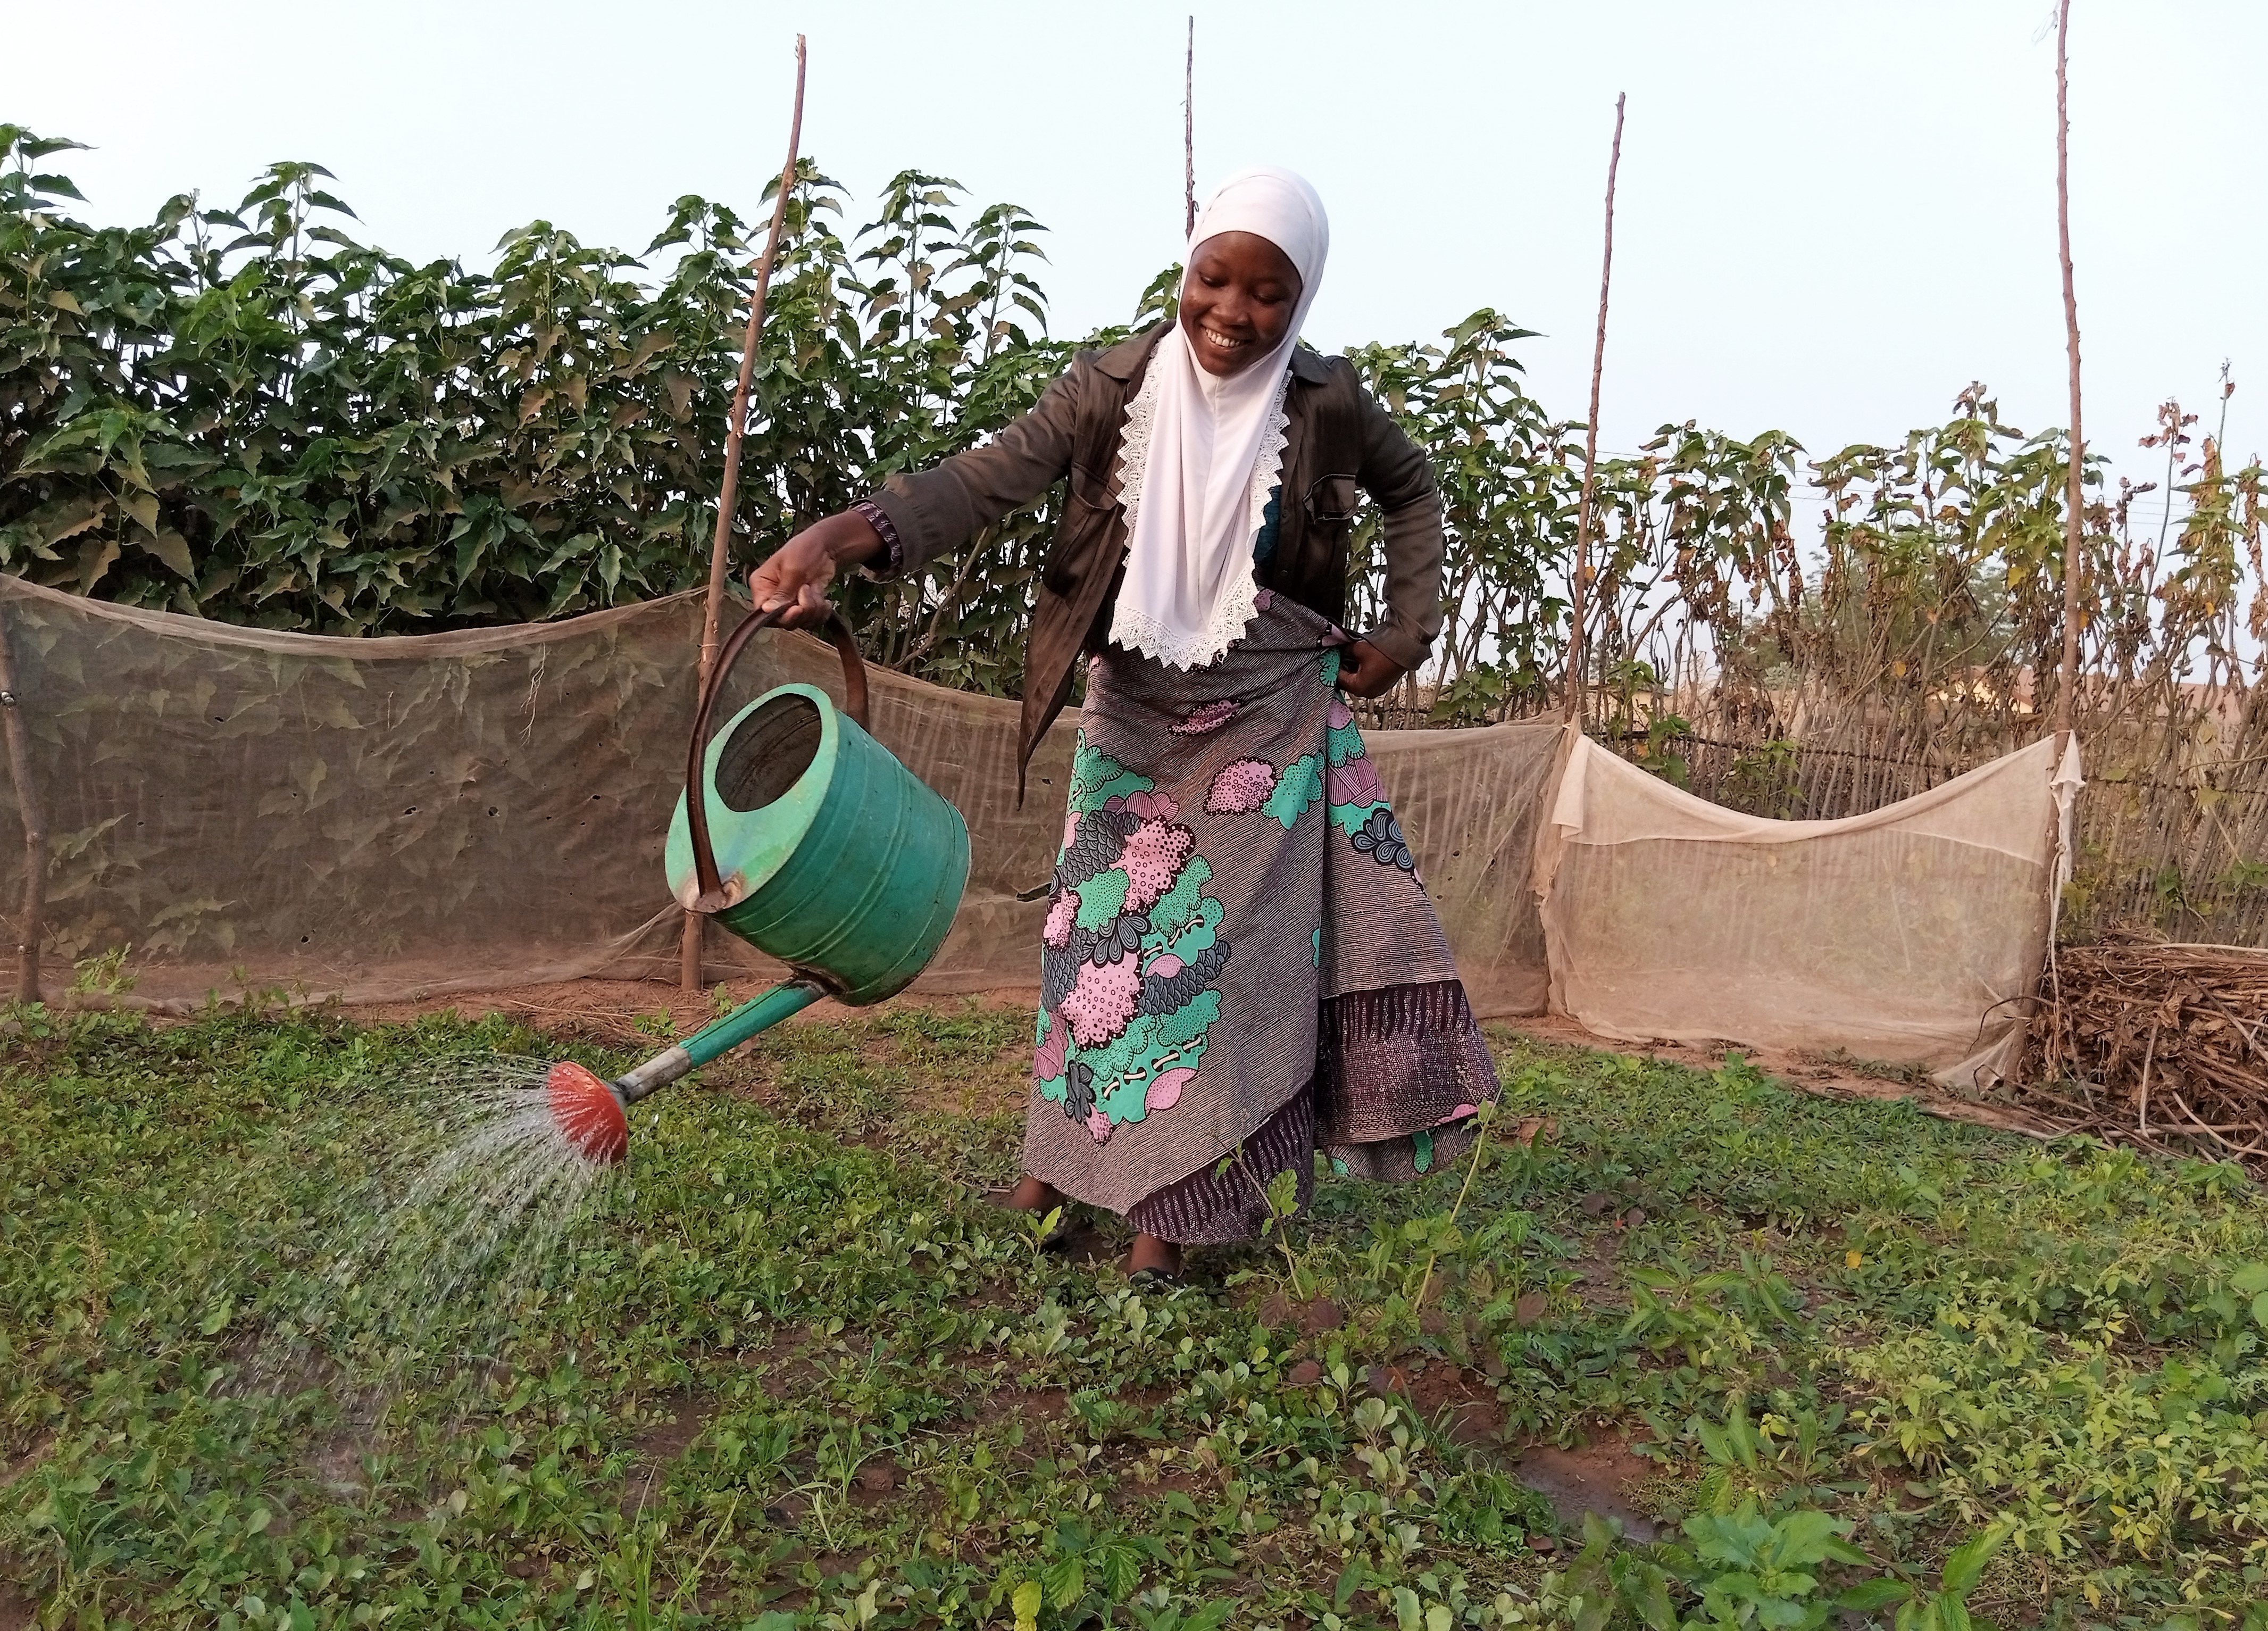 Inusah smiling, holding a watering can and watering a vegetable nursery